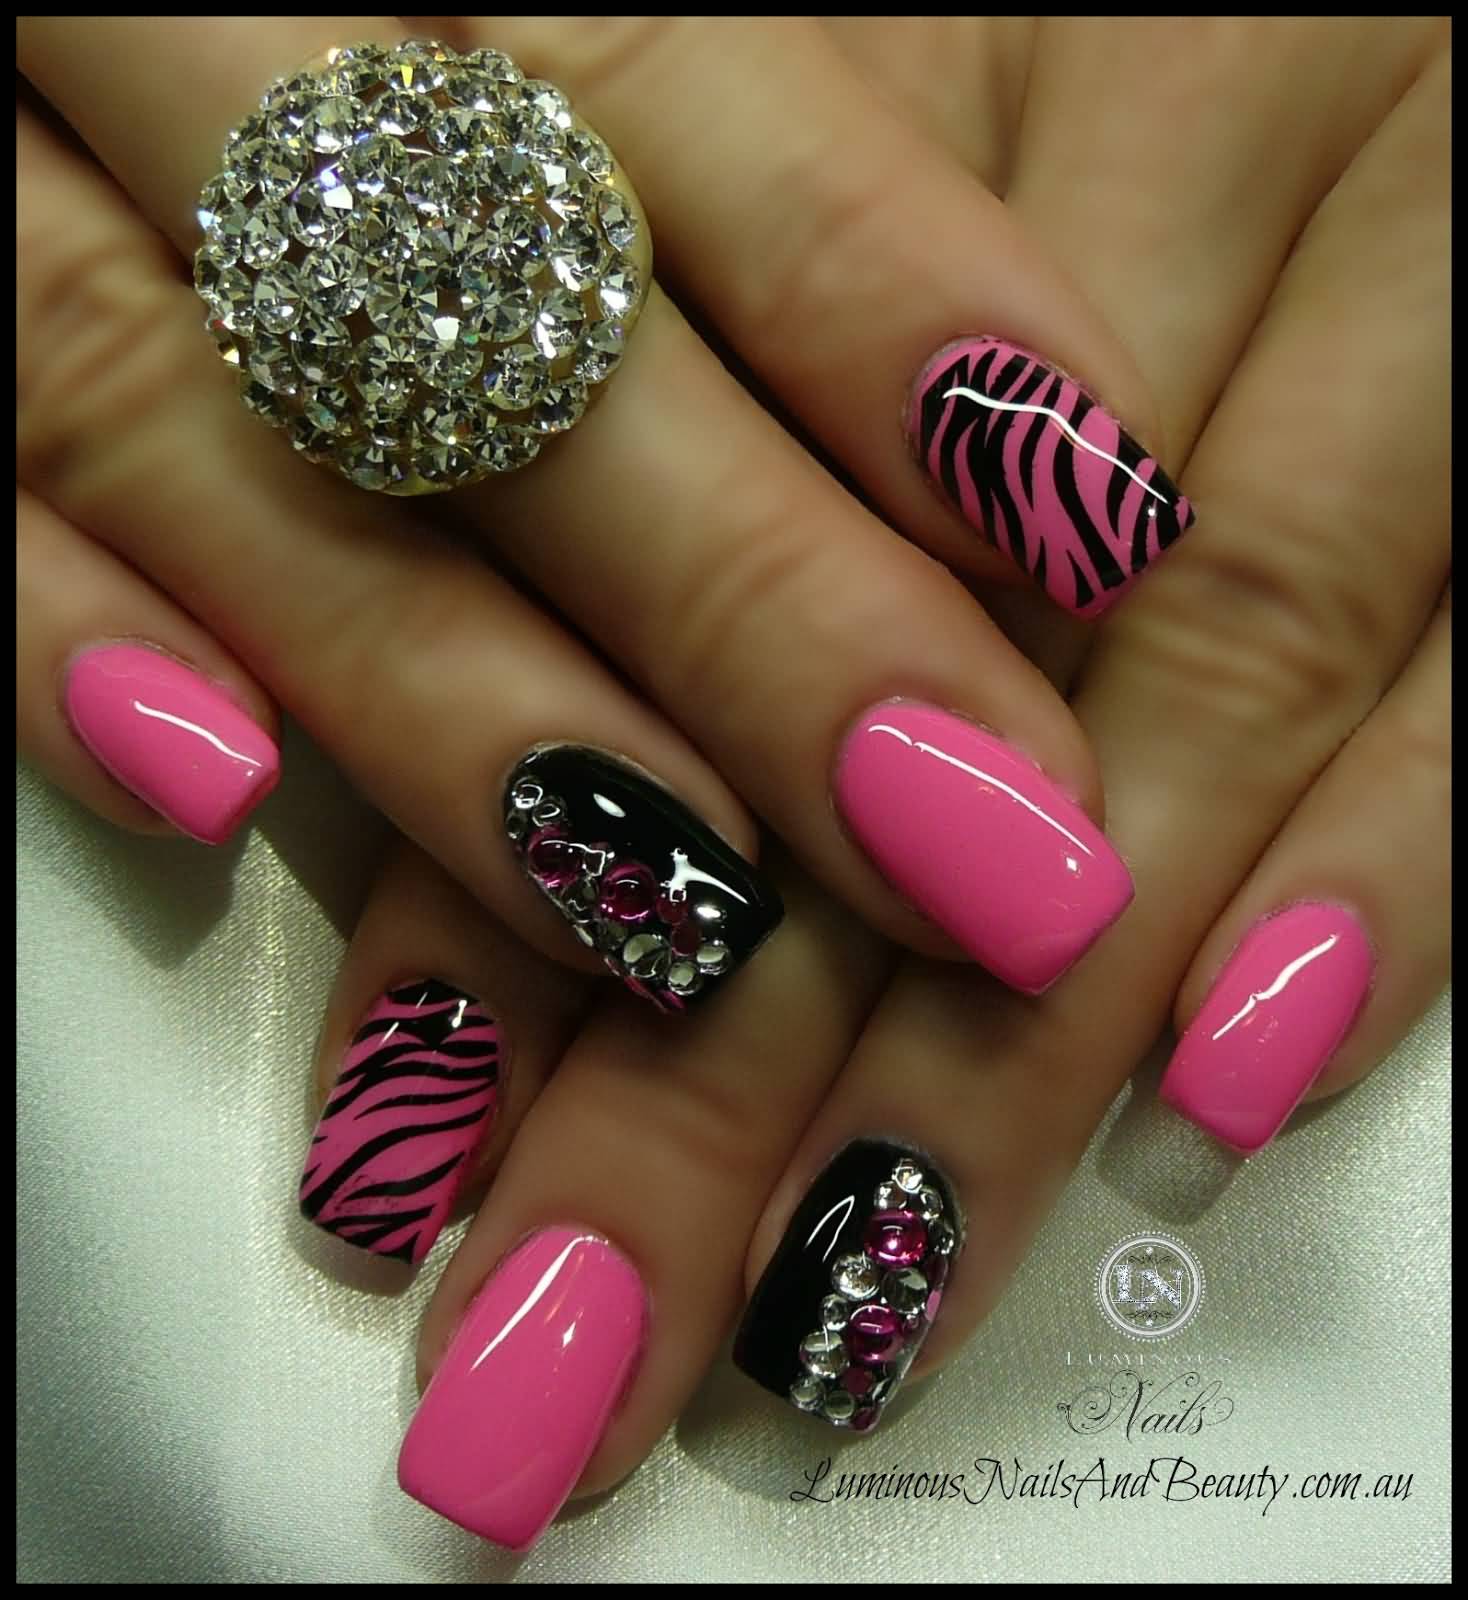 Black And Pink Zebra Print Acrylic Nail Art With Accent Rhinestones Design